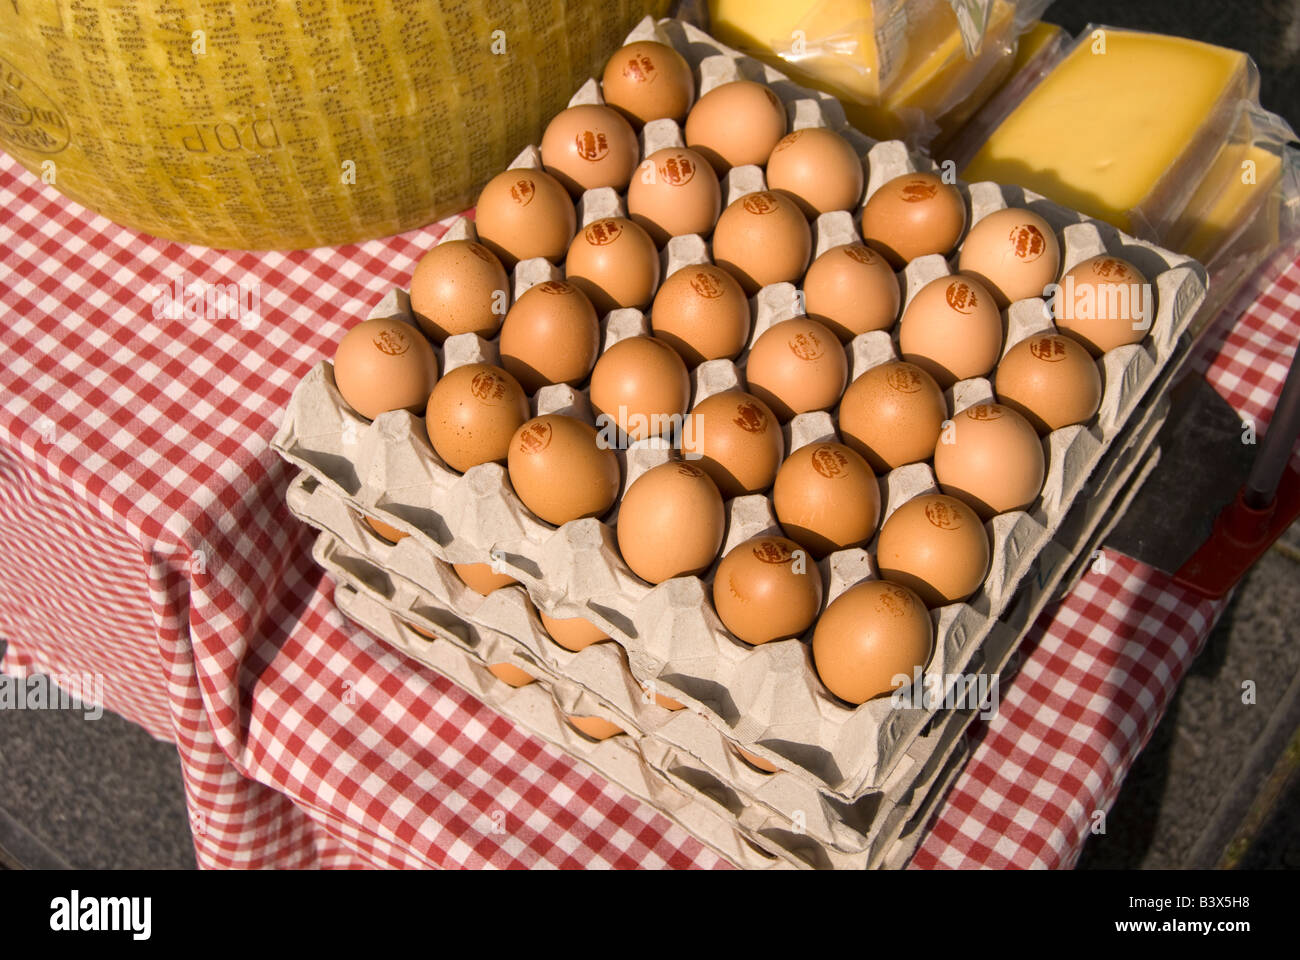 Egg crates and wrapped cheese at a market Stock Photo